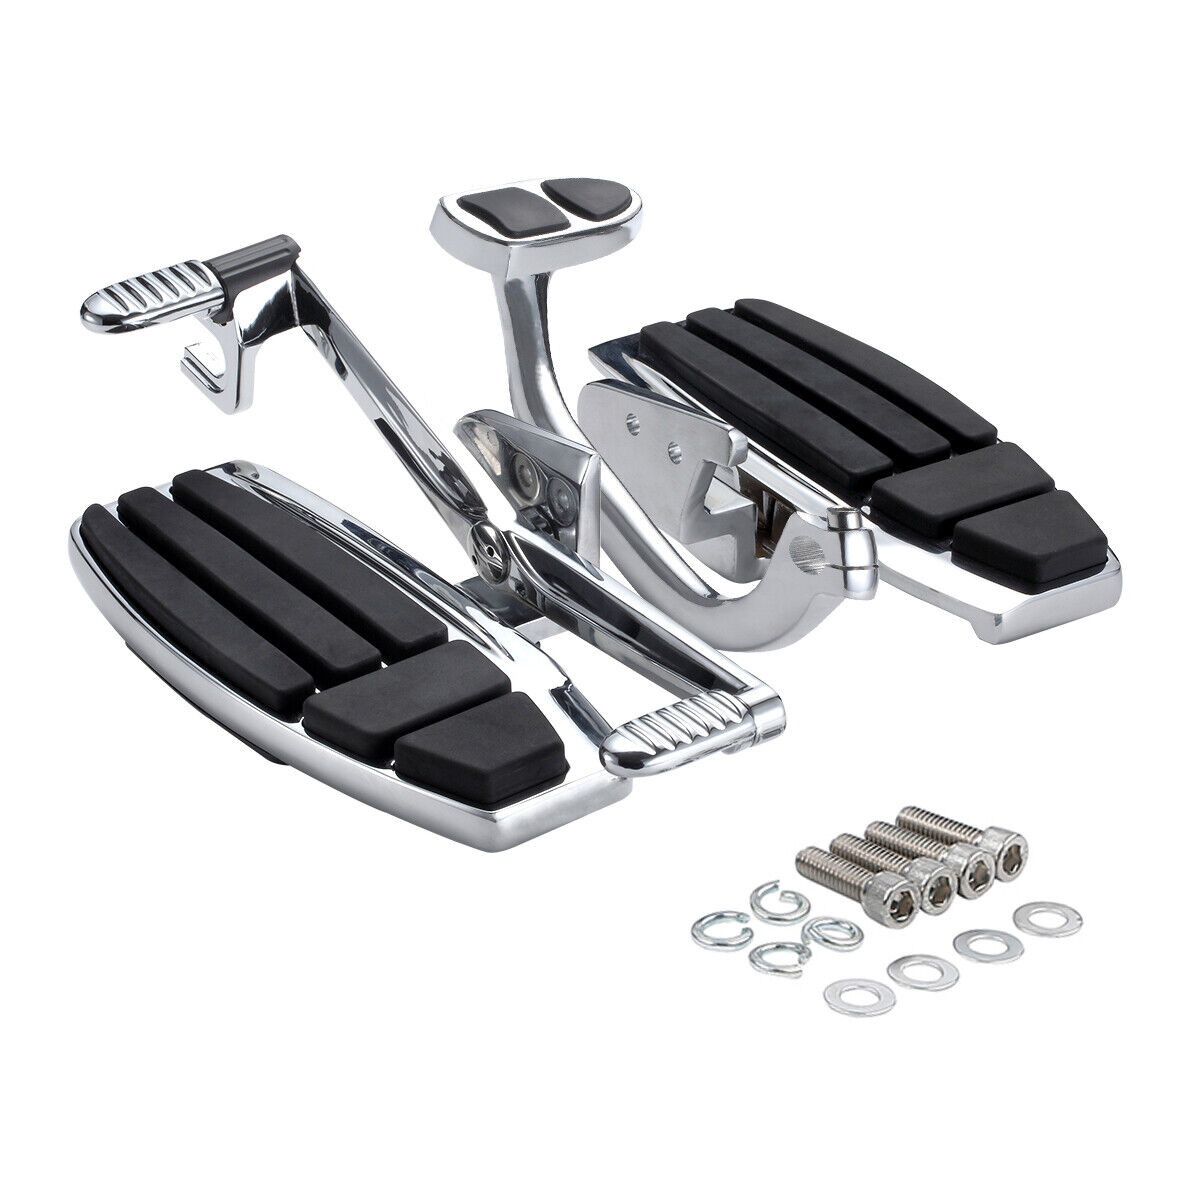 Chrome Driver Footboard Floorboard Fit For Honda Goldwing 1800 2001-17 Valkyrie